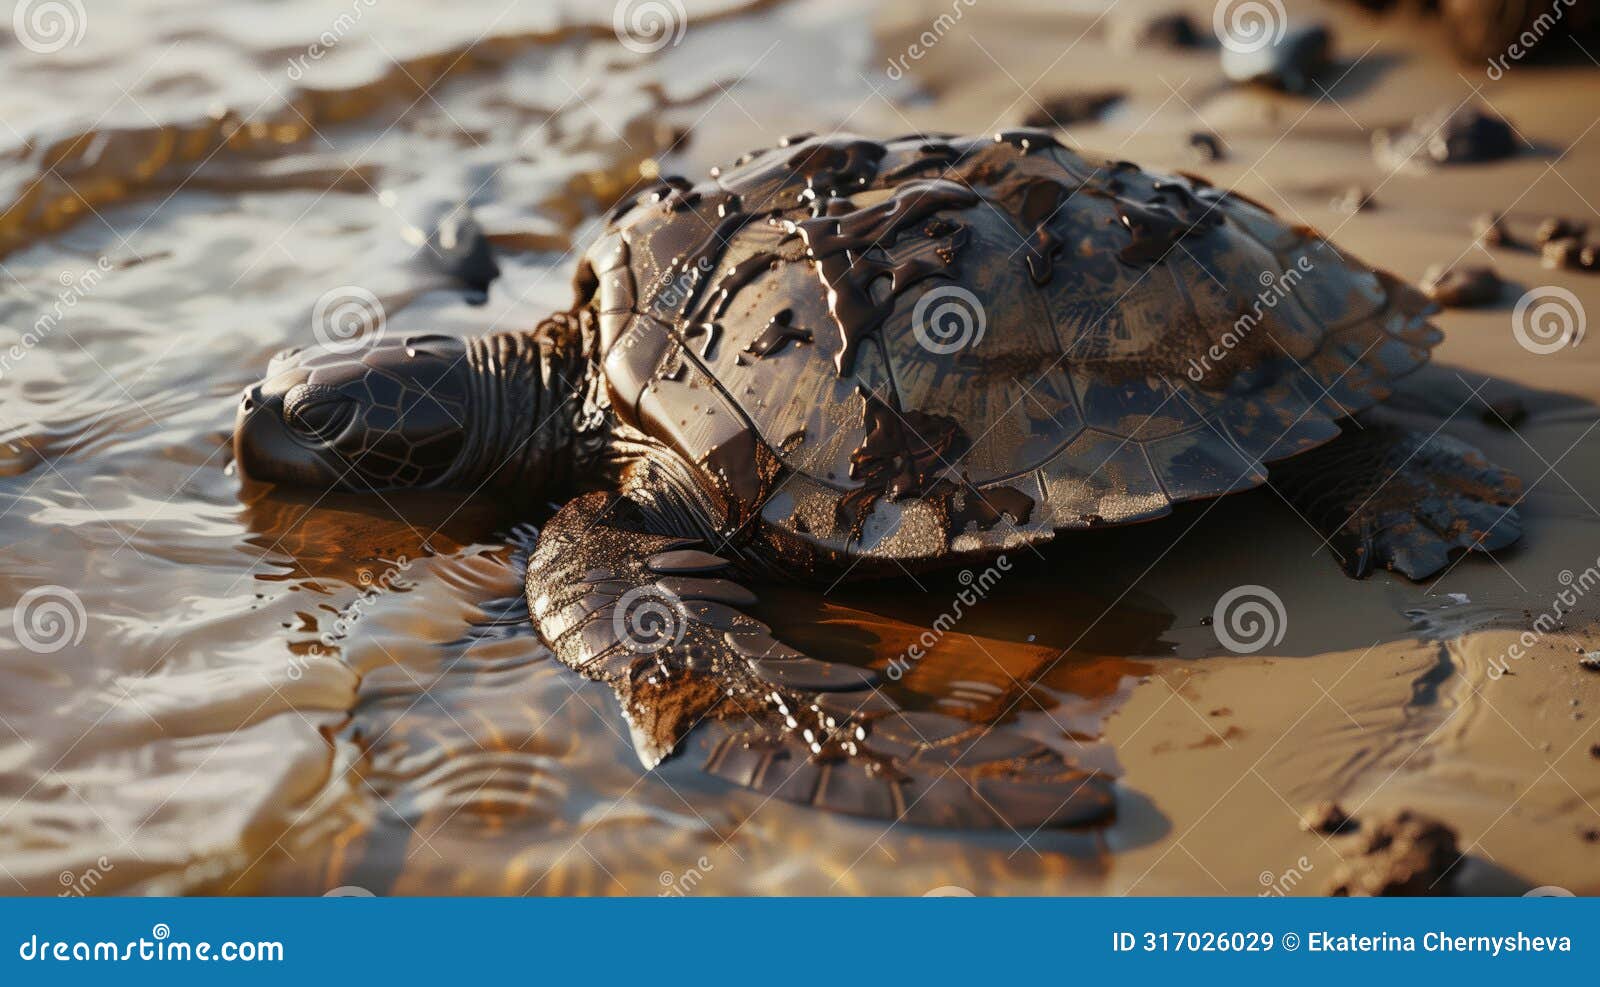 a sea turtle, covered in oil, lies on the beach with its head in the water. ocean pollution, the impact of oil spills on marine